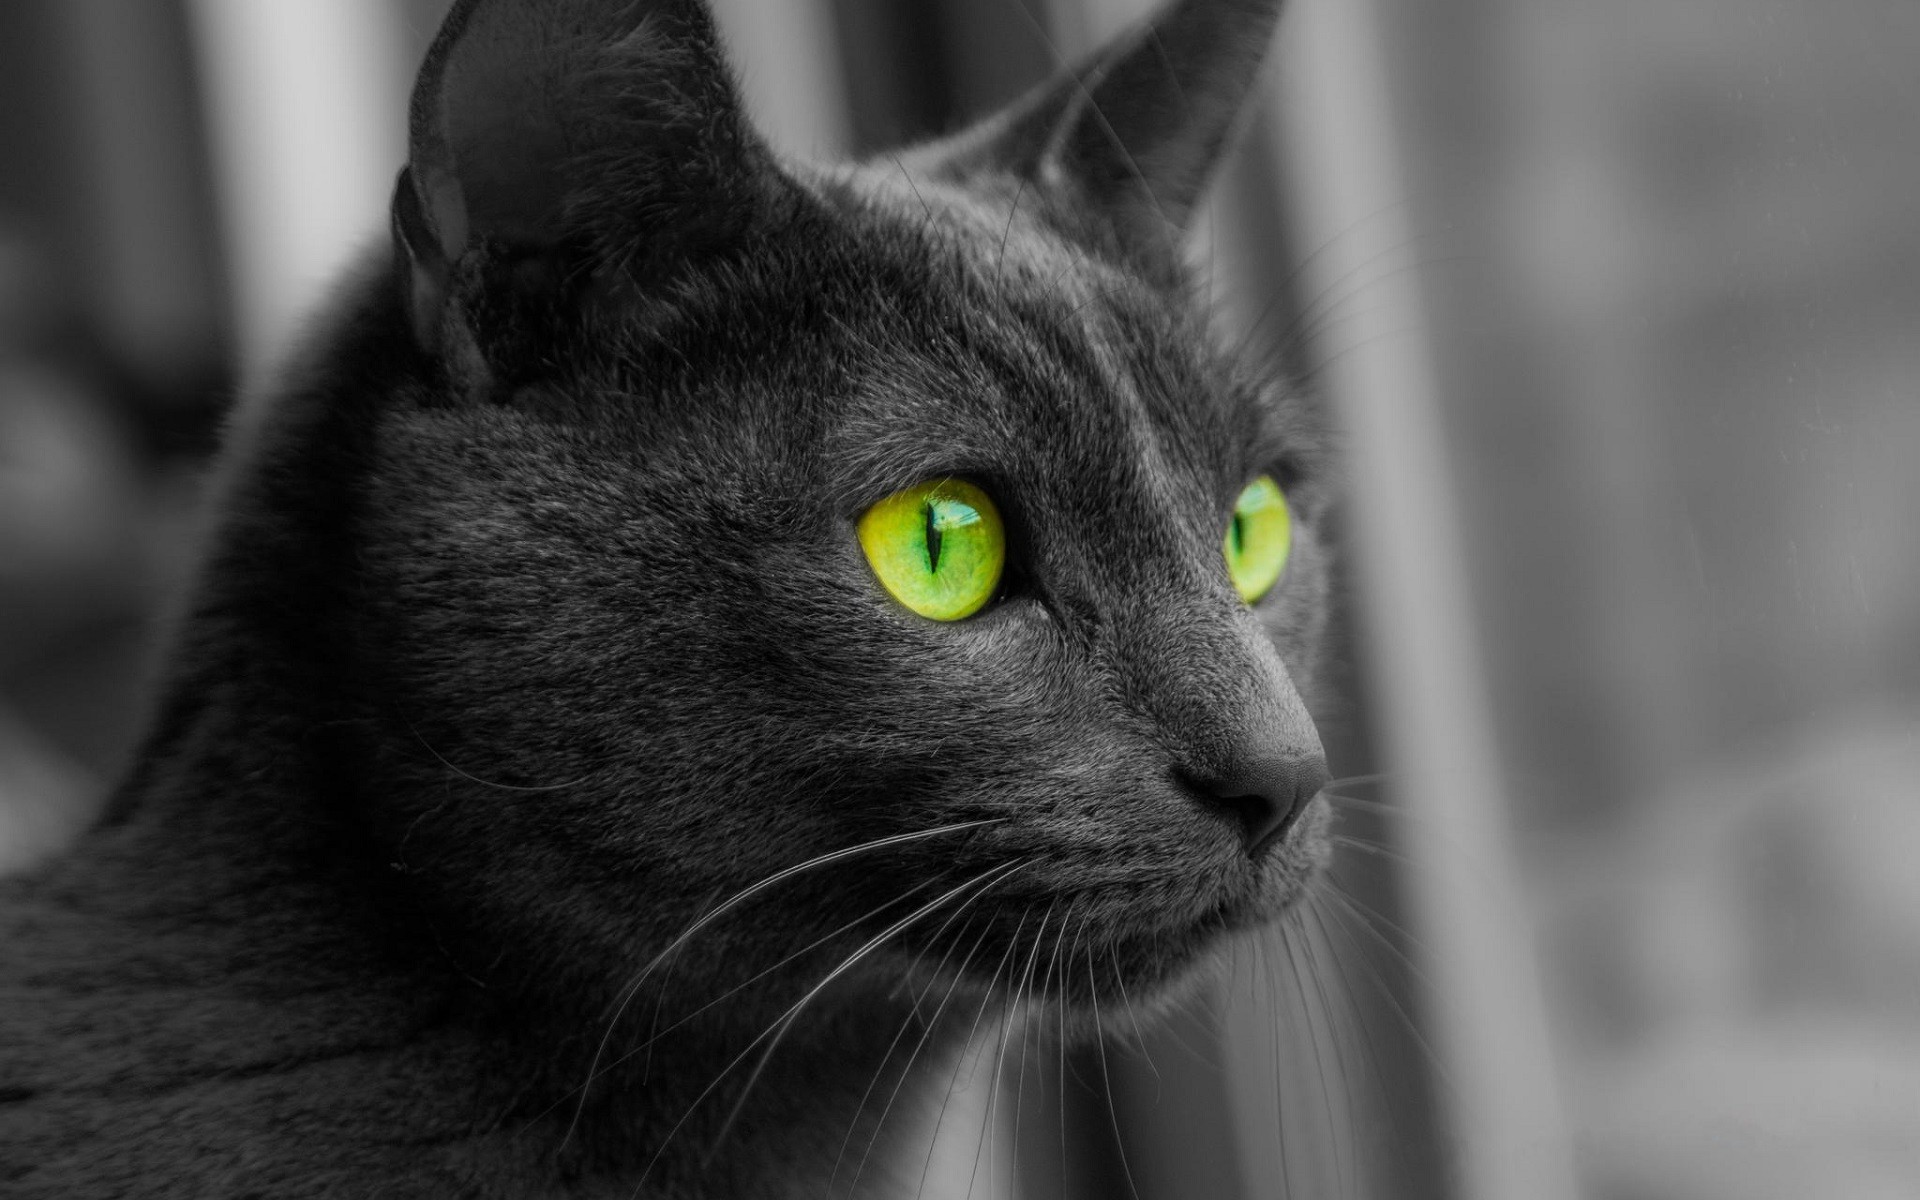 Wallpapers animals cats green eyes on the desktop